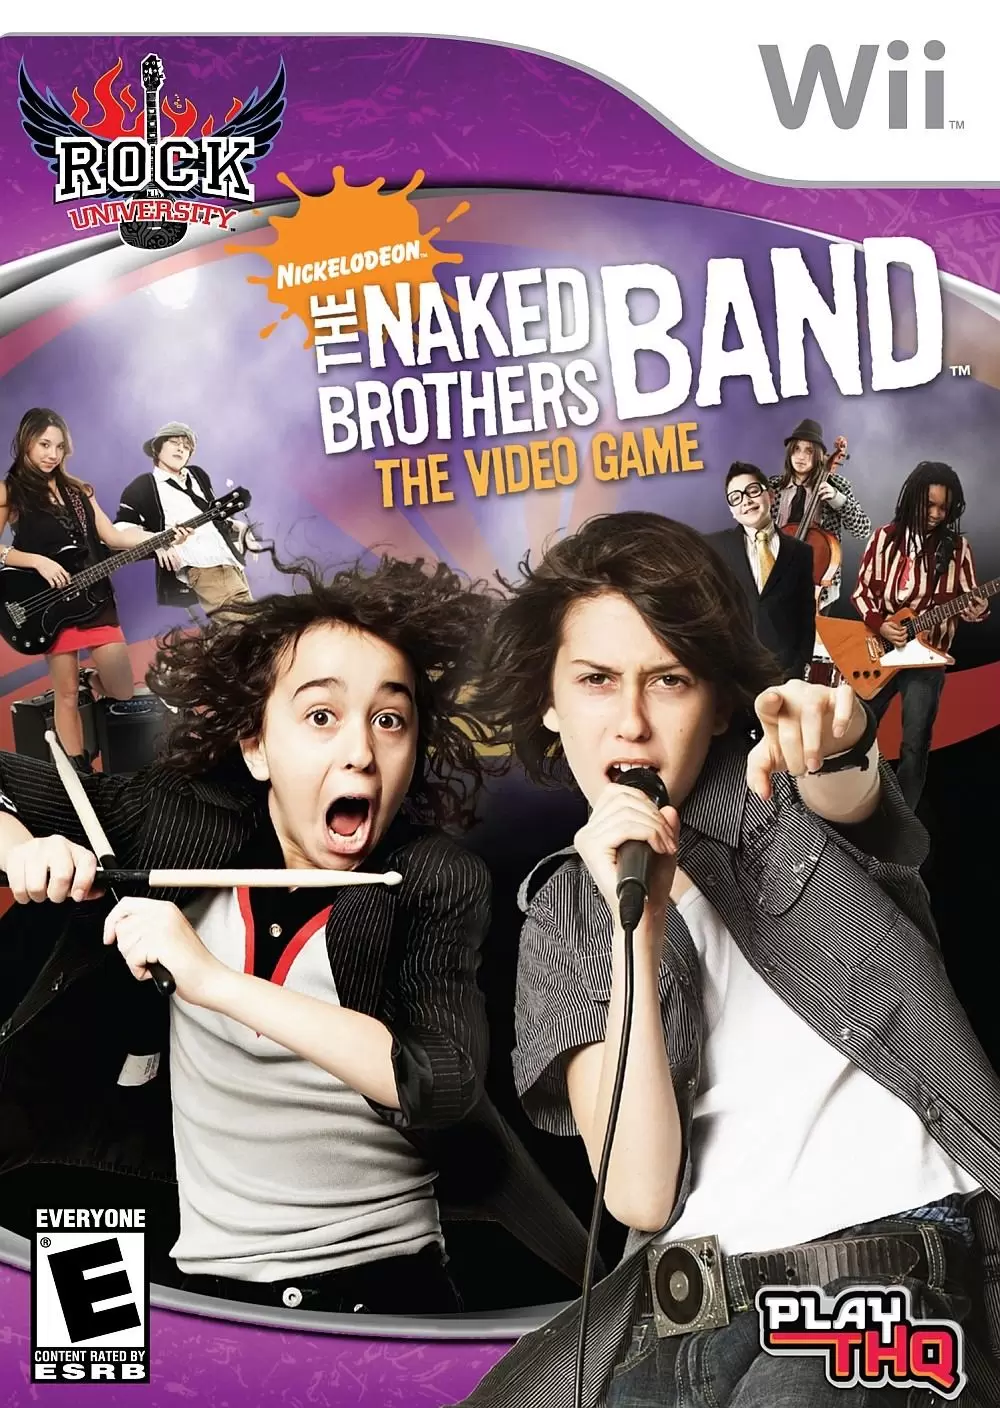 Nintendo Wii Games - Rock University Presents the Naked Brothers Band